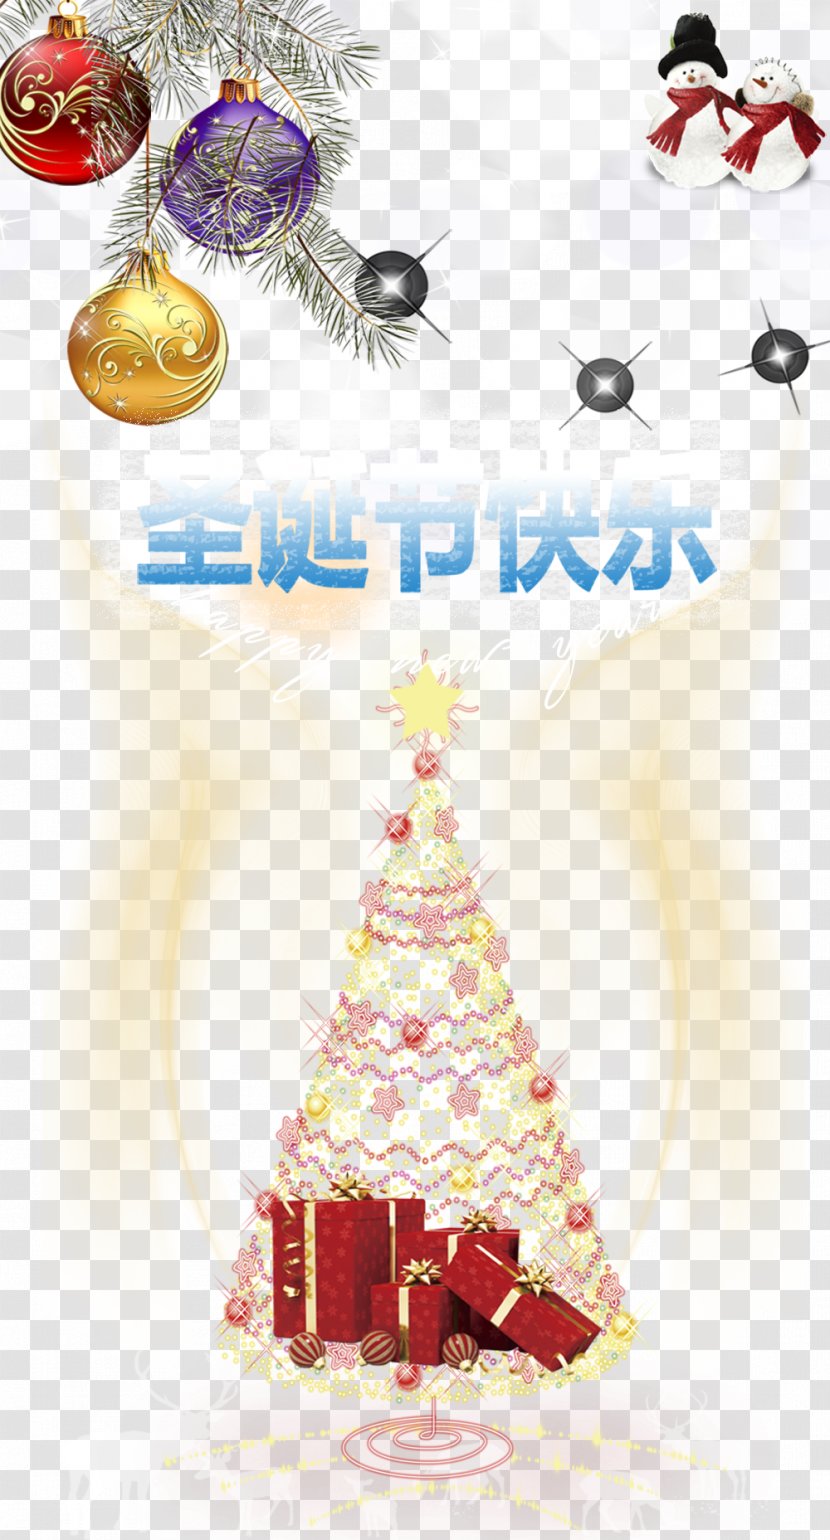 Christmas Ornament And Holiday Season Gift Gratis - Thanksgiving - Free Downloads Transparent PNG